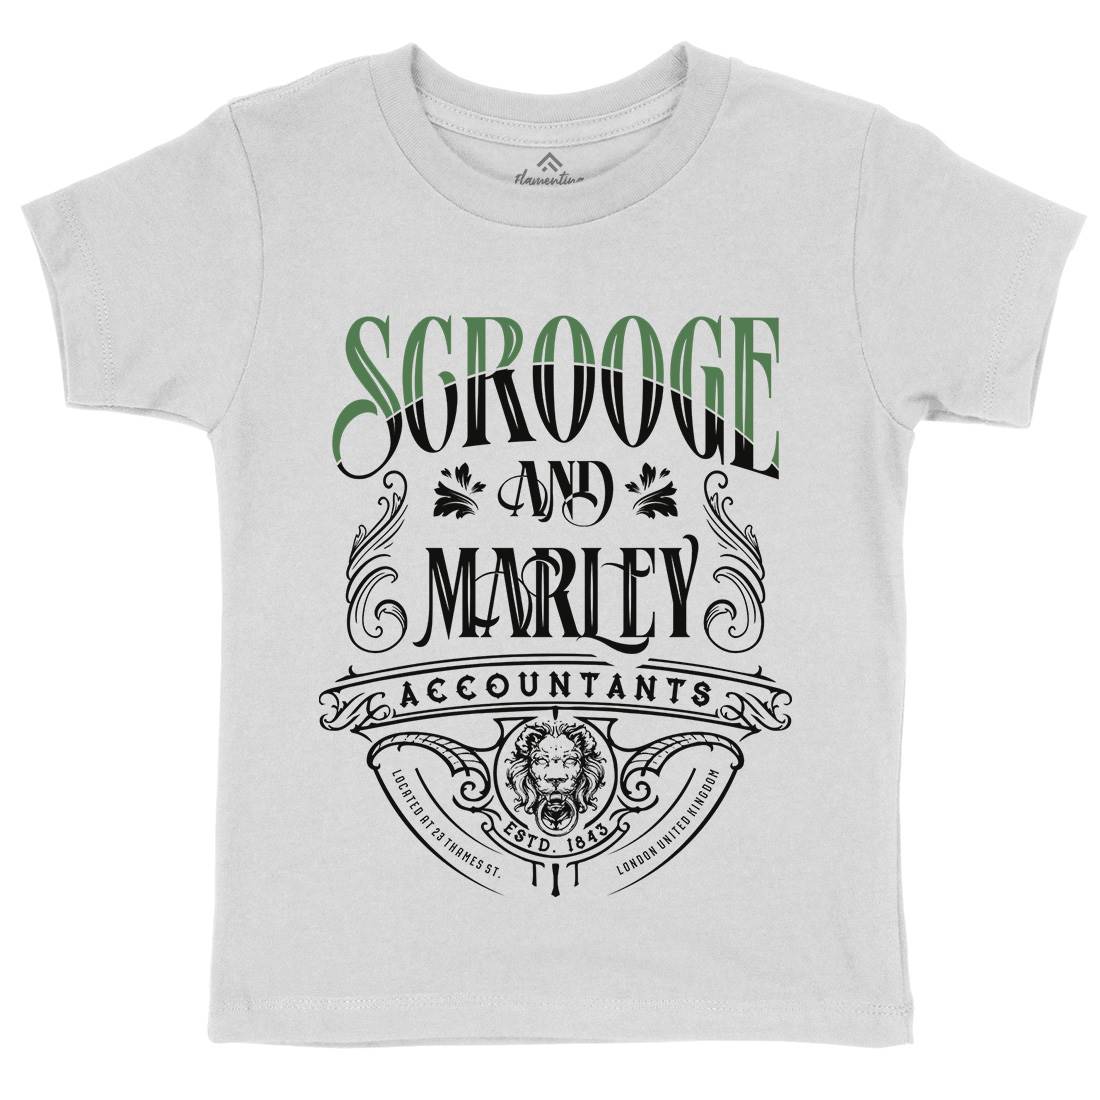 Scrooge And Marley Kids Organic Crew Neck T-Shirt Christmas D100